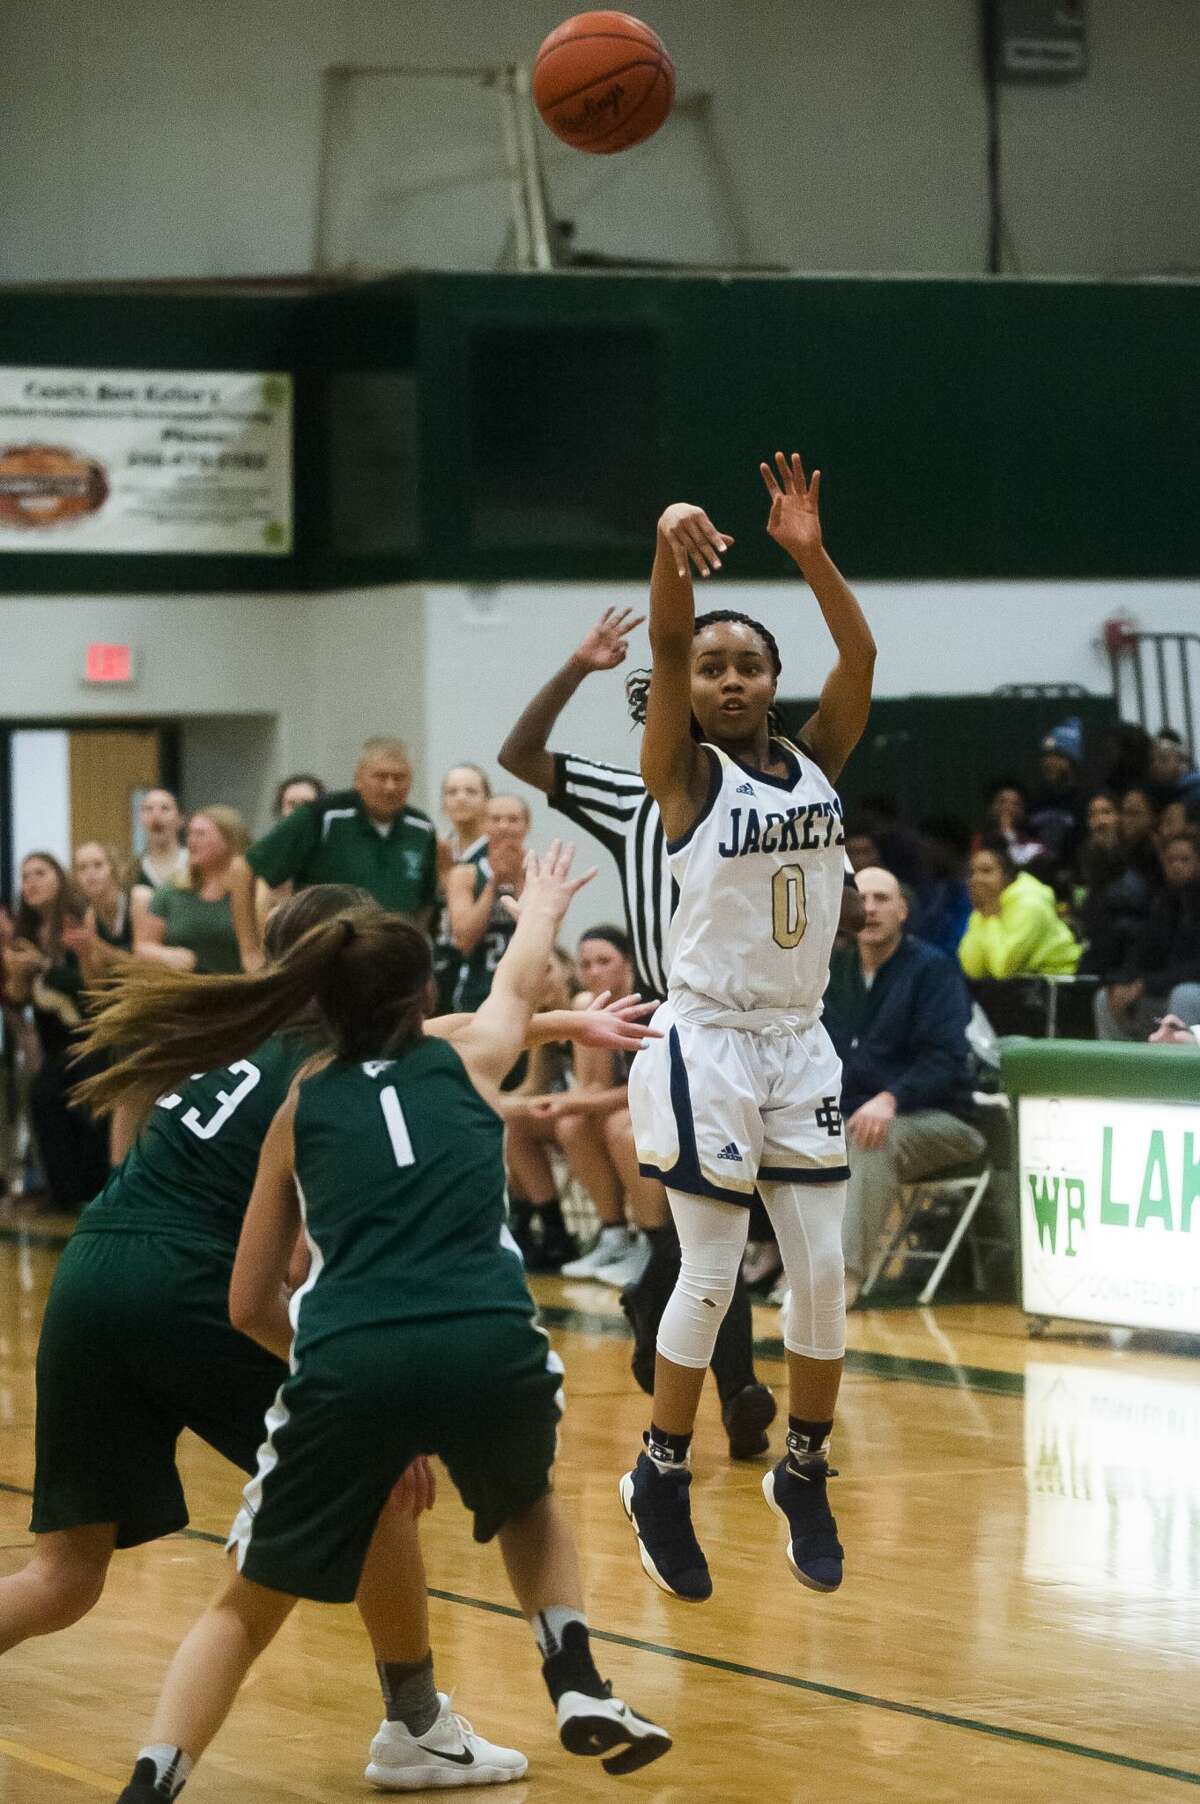 Detroit Country Day senior Kaela Webb takes a shot during their Class B state quarterfinals game against Freeland on Tuesday, March 13, 2018 at West Bloomfield High School. (Katy Kildee/kkildee@mdn.net)